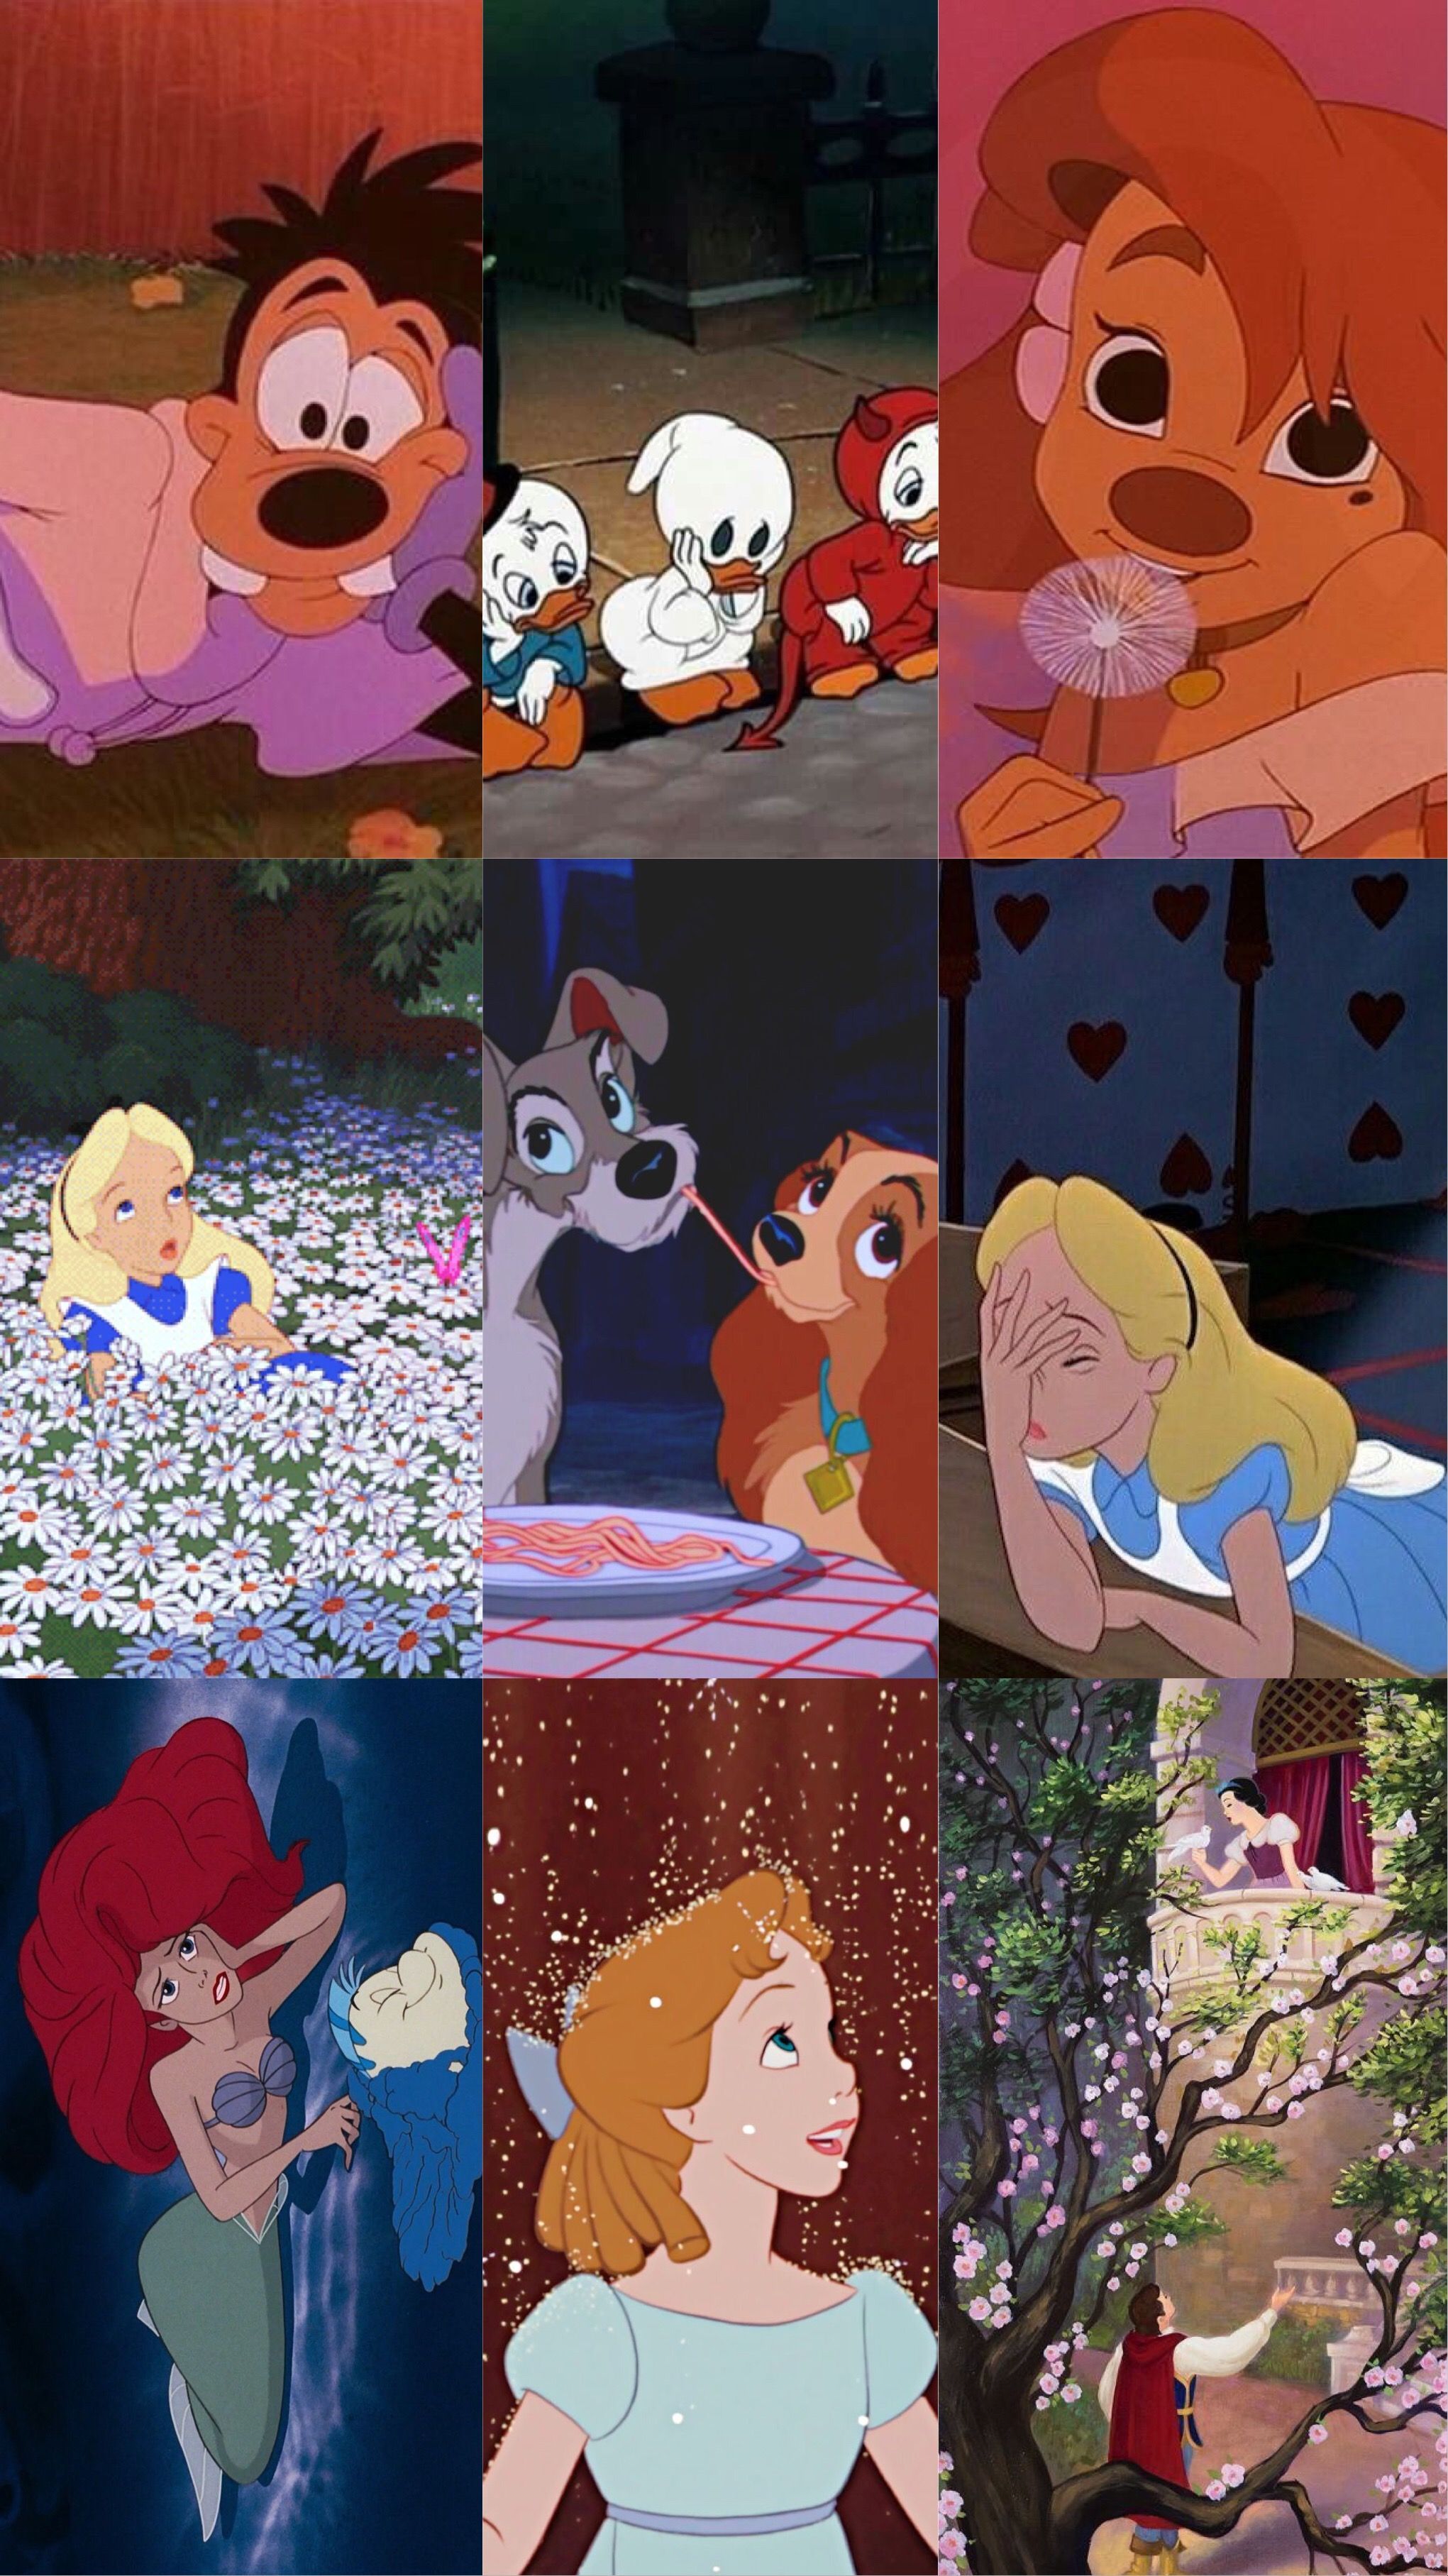 A collage of different Disney characters and scenes. - Disney